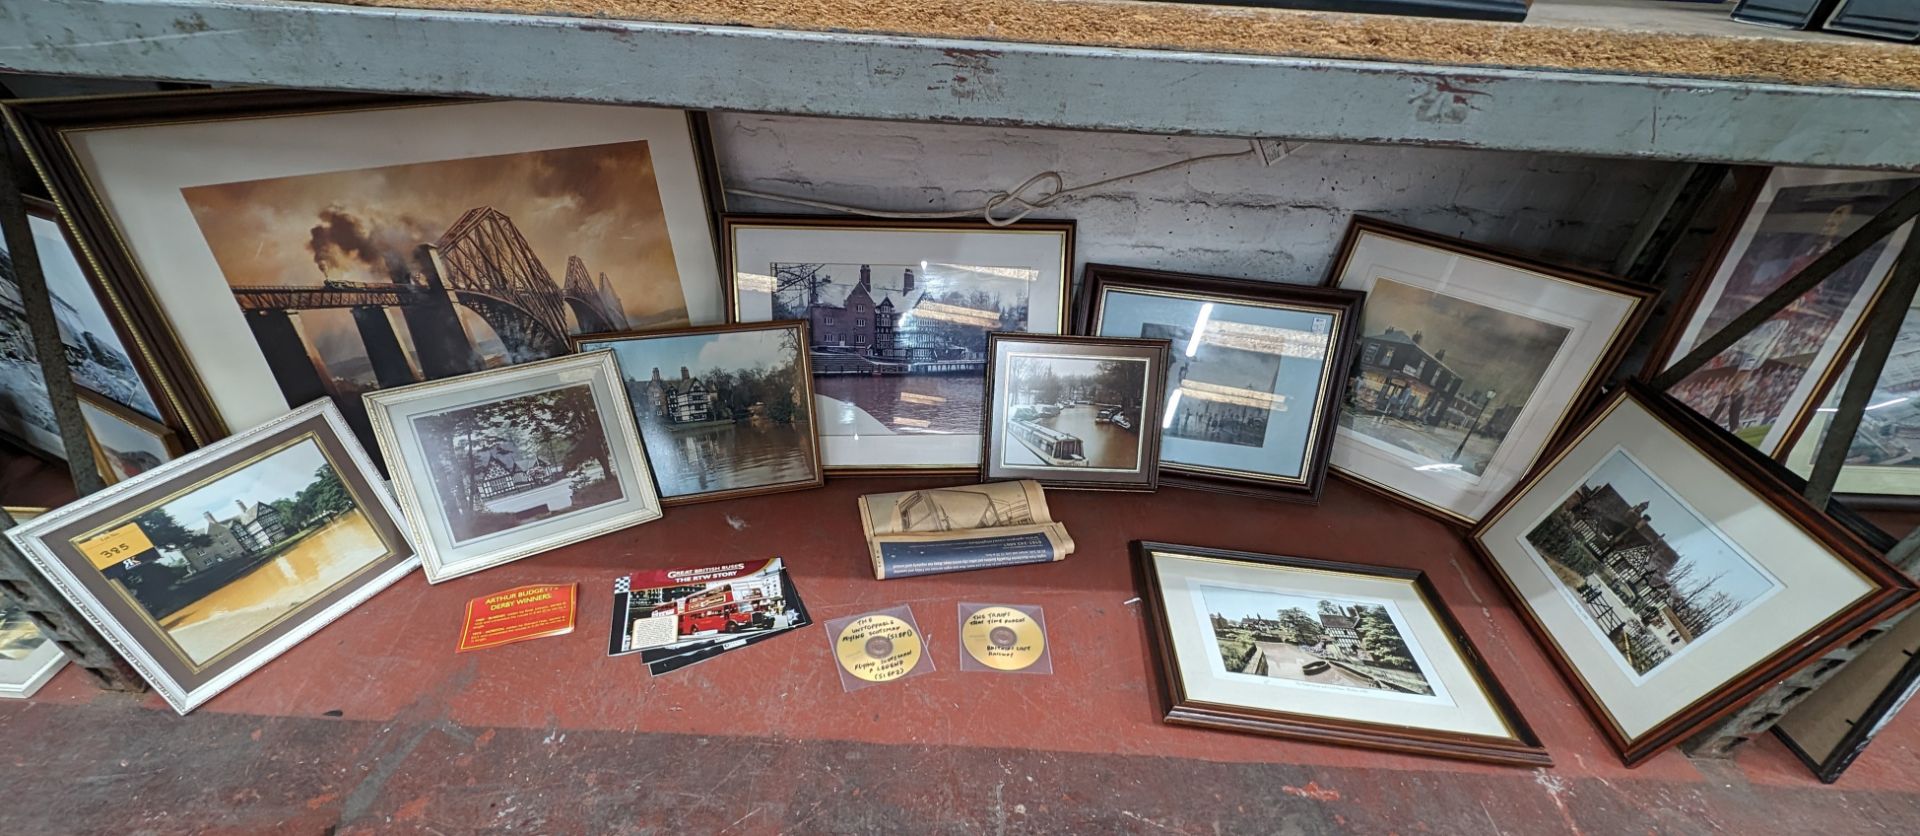 The contents of a bay of scenic photographs & other items - 10 framed items plus quantity of assorte - Image 2 of 12